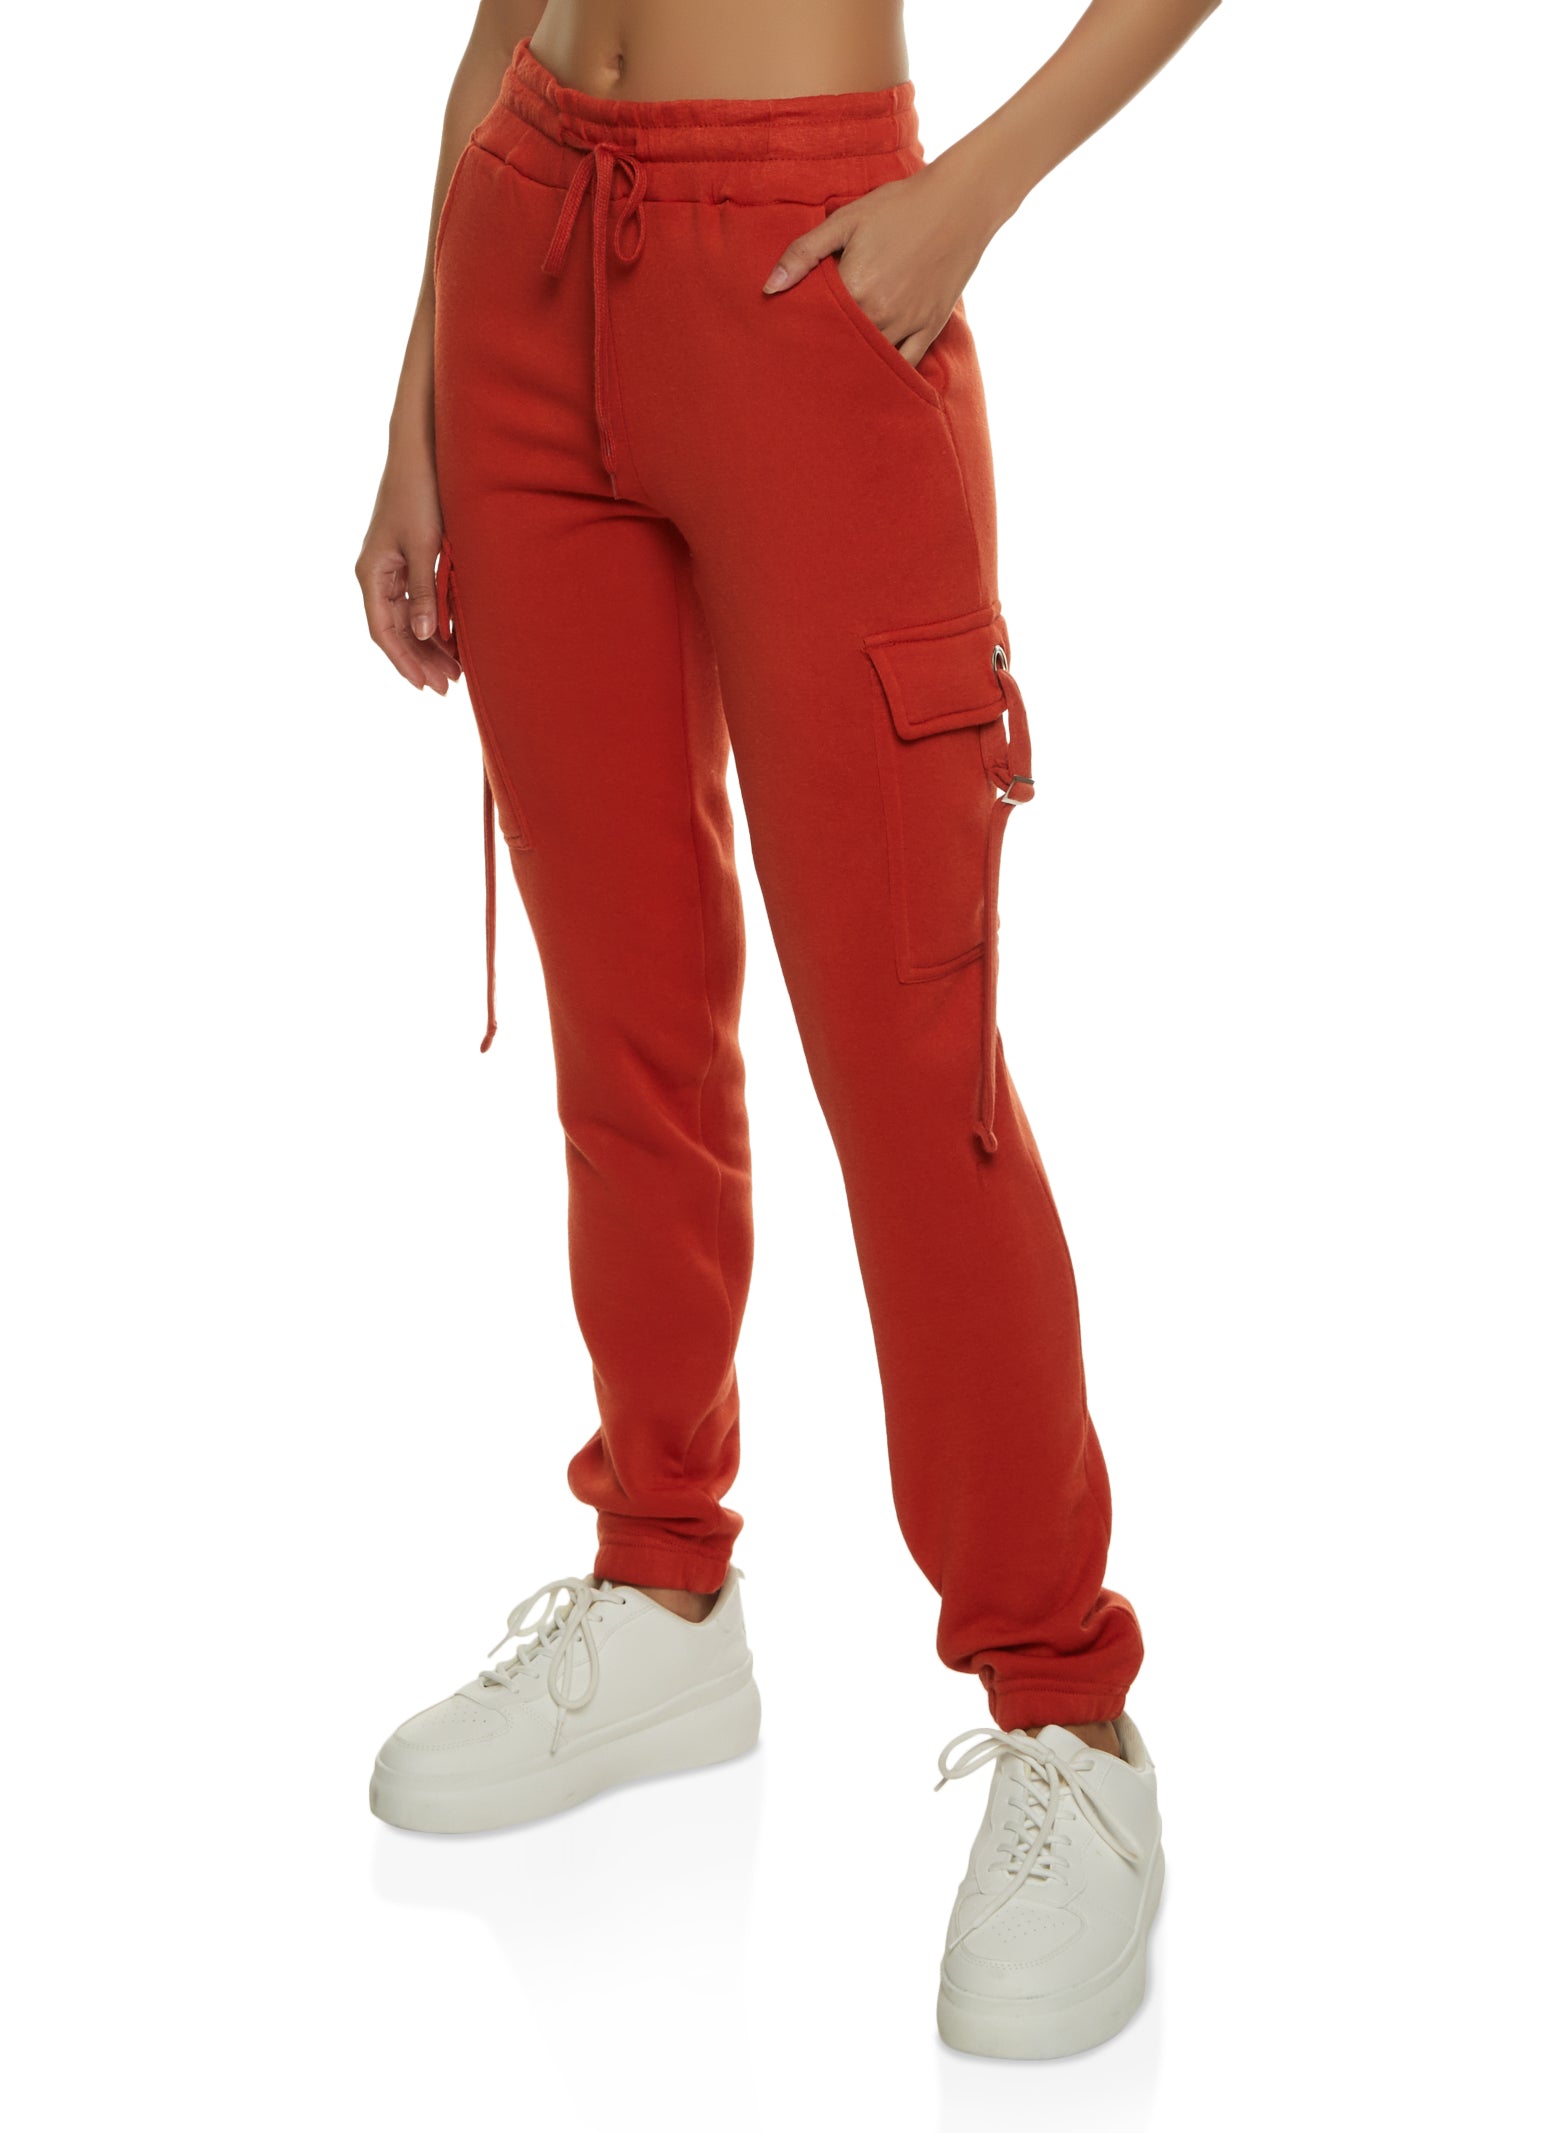 Womens Joggers and Sweatpants, Everyday Low Prices